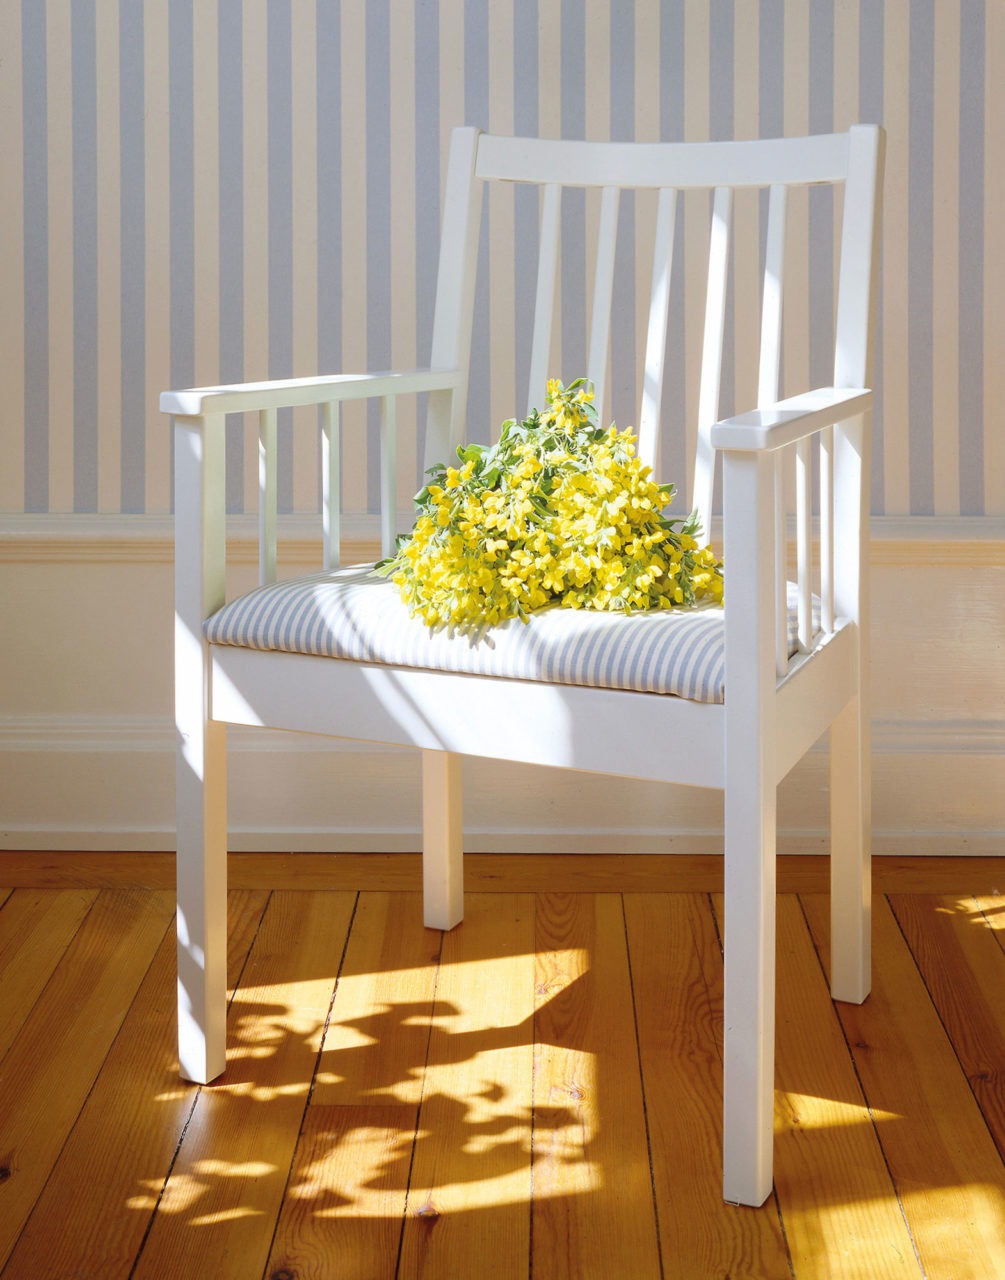 White wooden armchair stands on harwood floor, a bouquet of yellow flowers is placed on the blue-white-striped seat cushion.